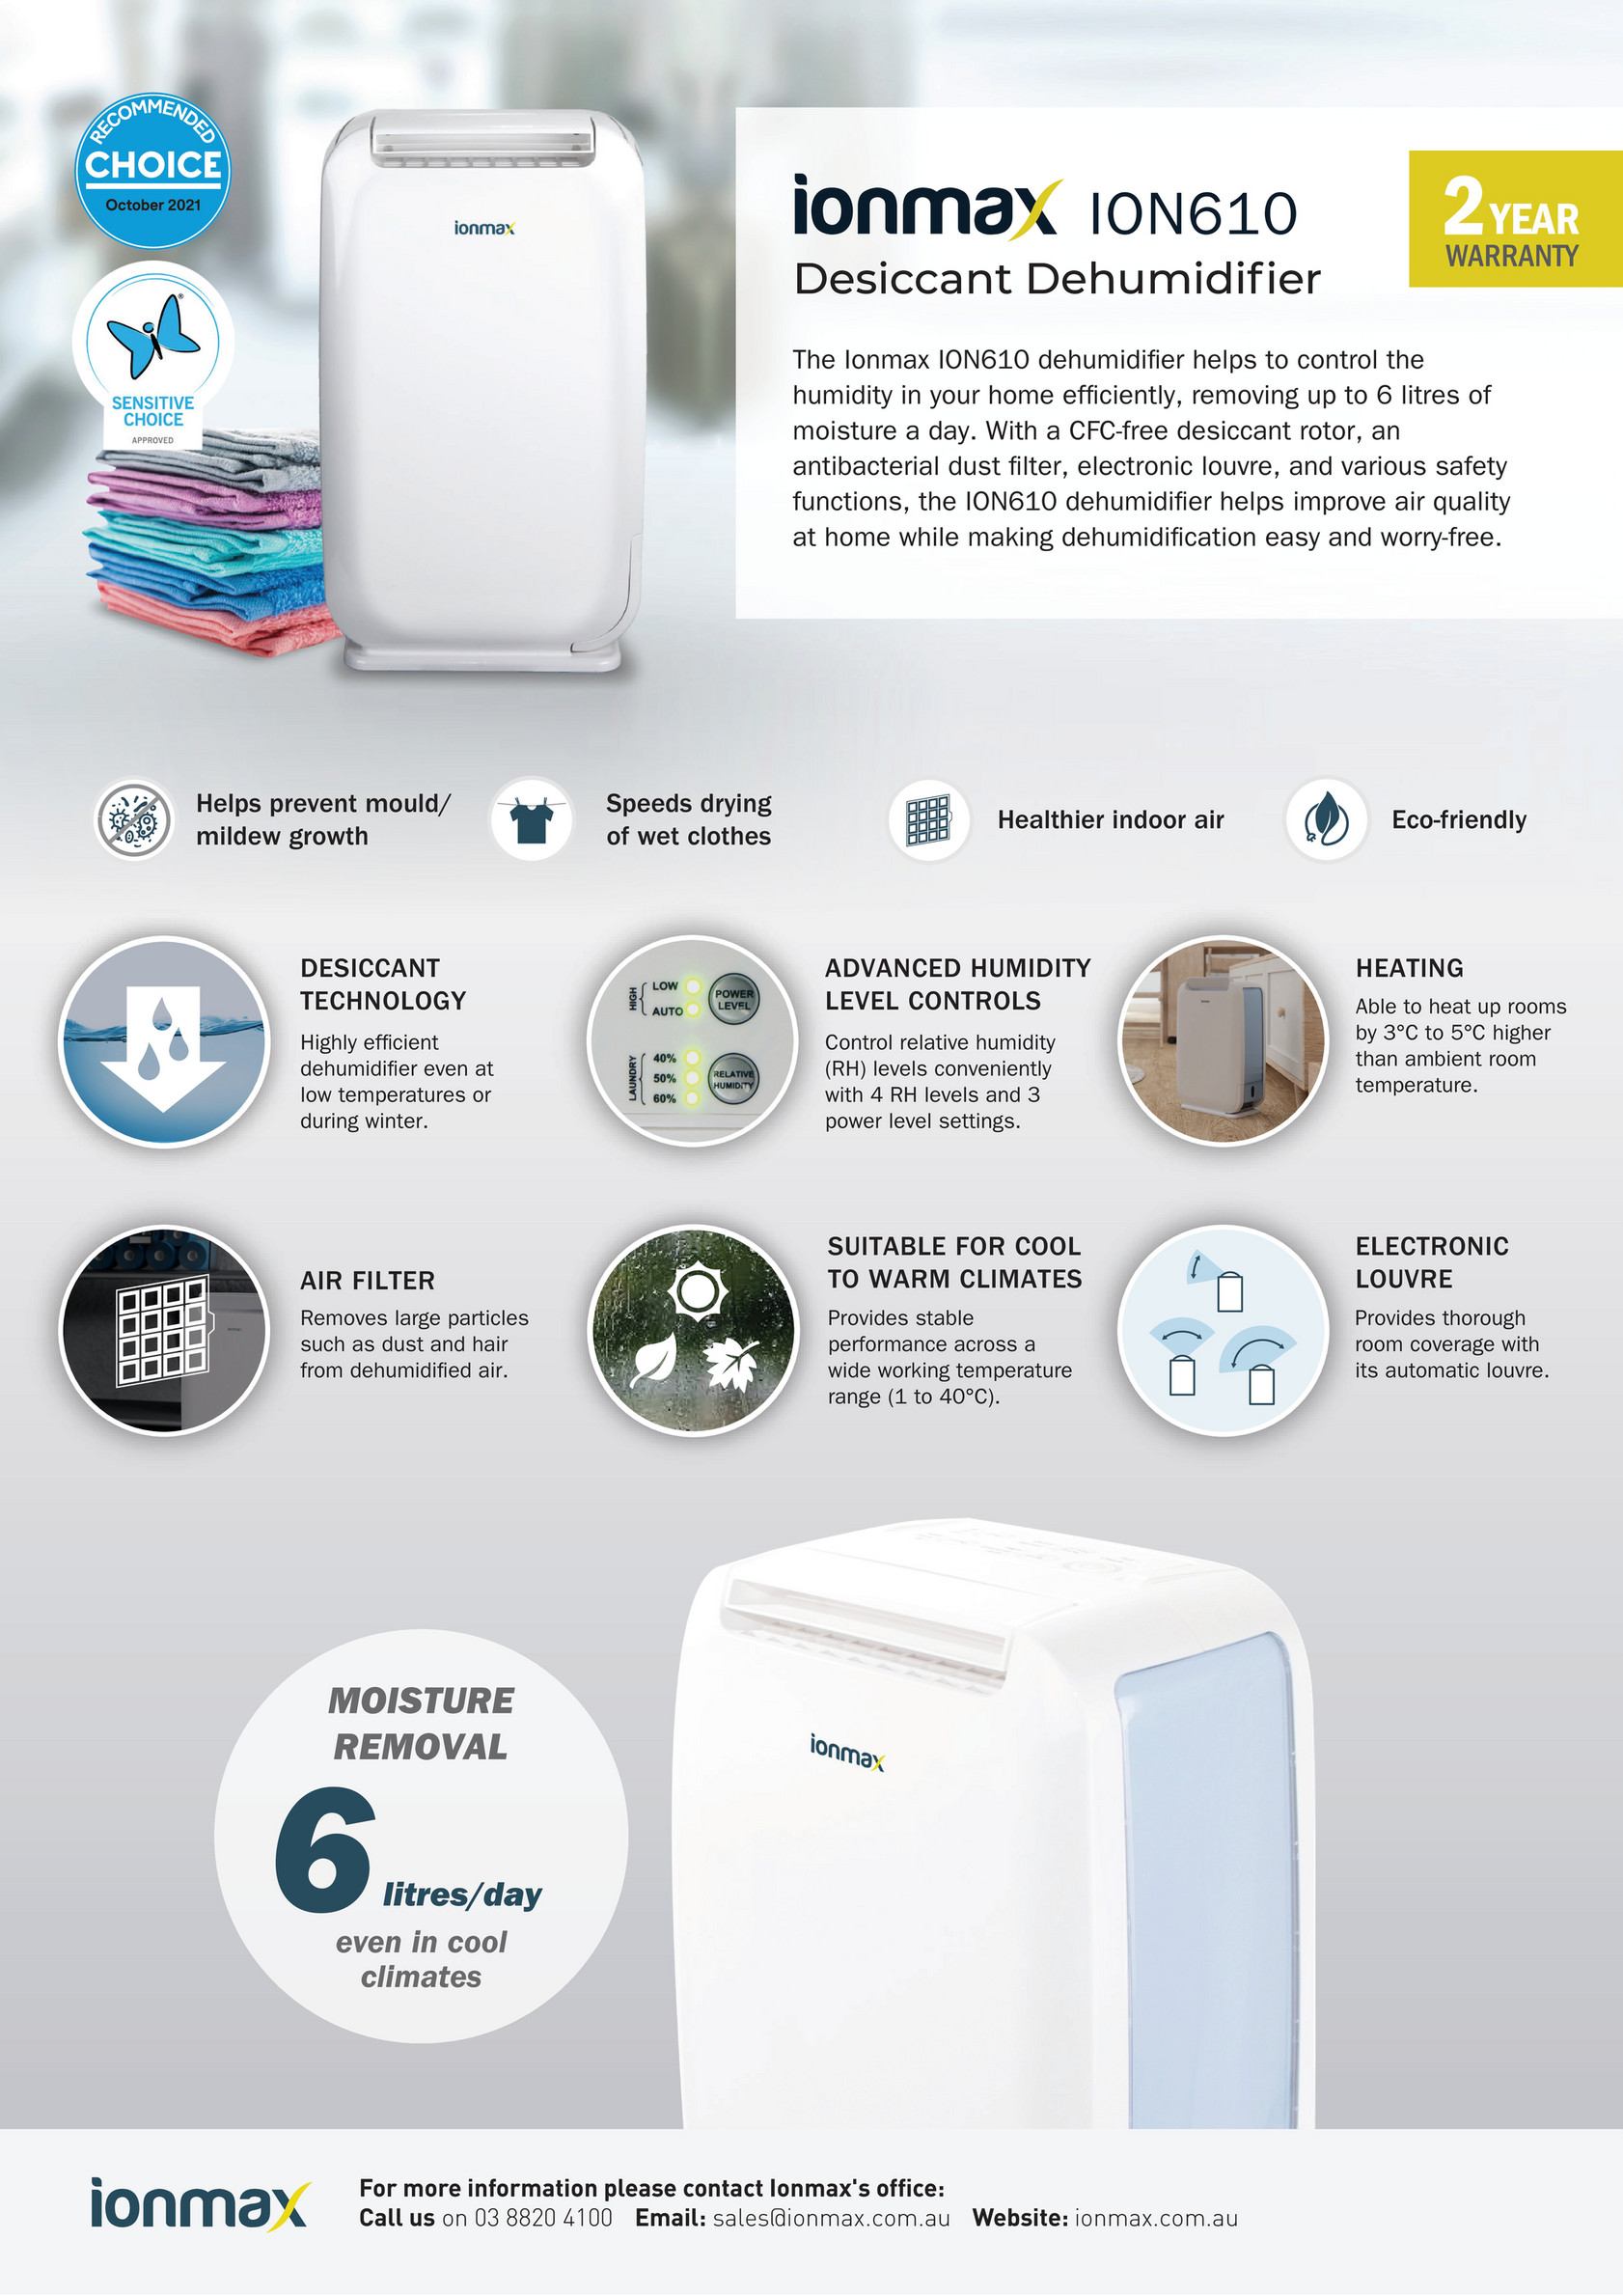 Dehumidifier vs Humidity Meter: Which is more accurate? – Ionmax